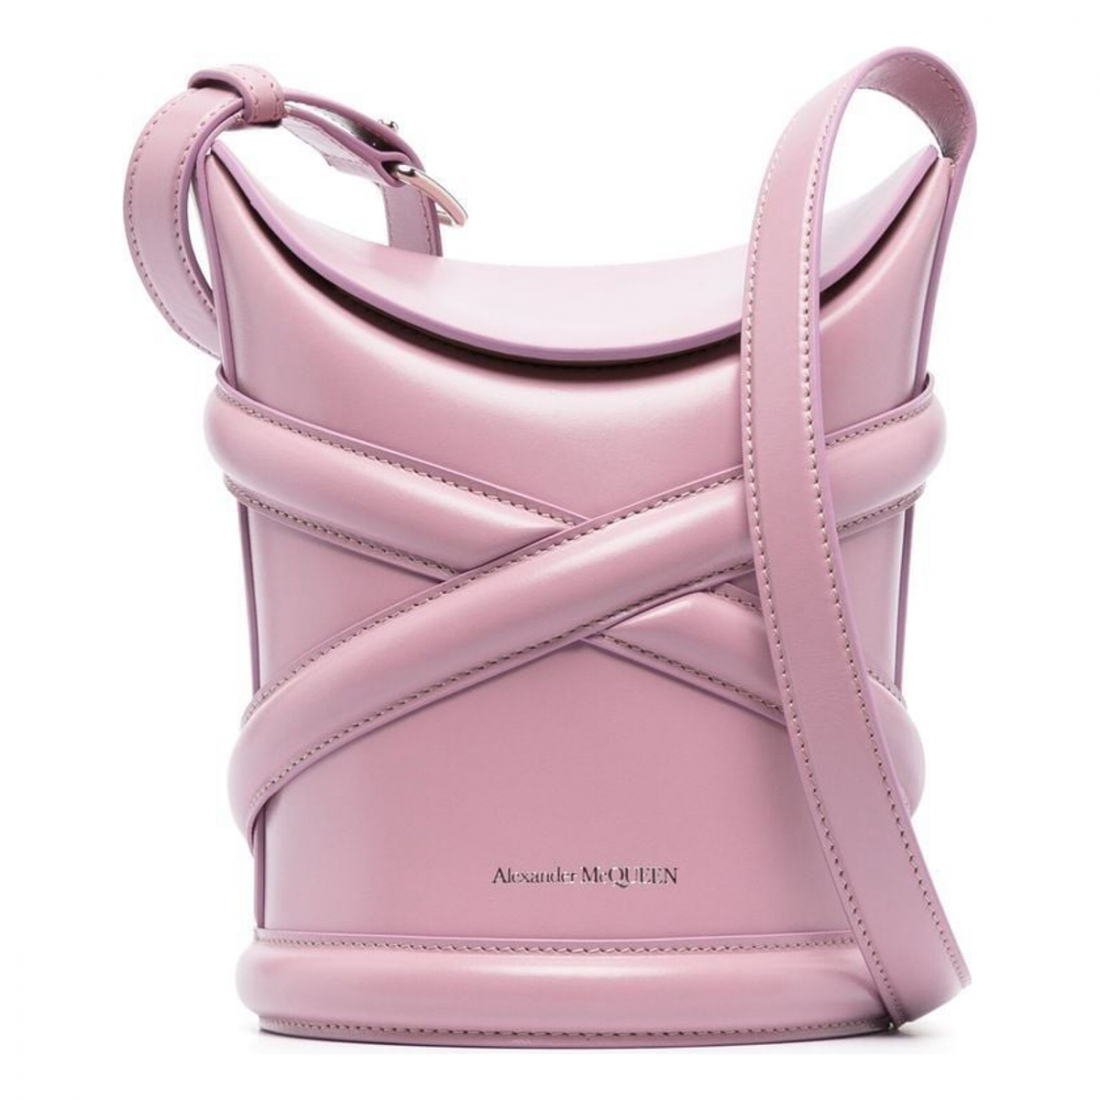 Women's 'The Small Curve' Bucket Bag